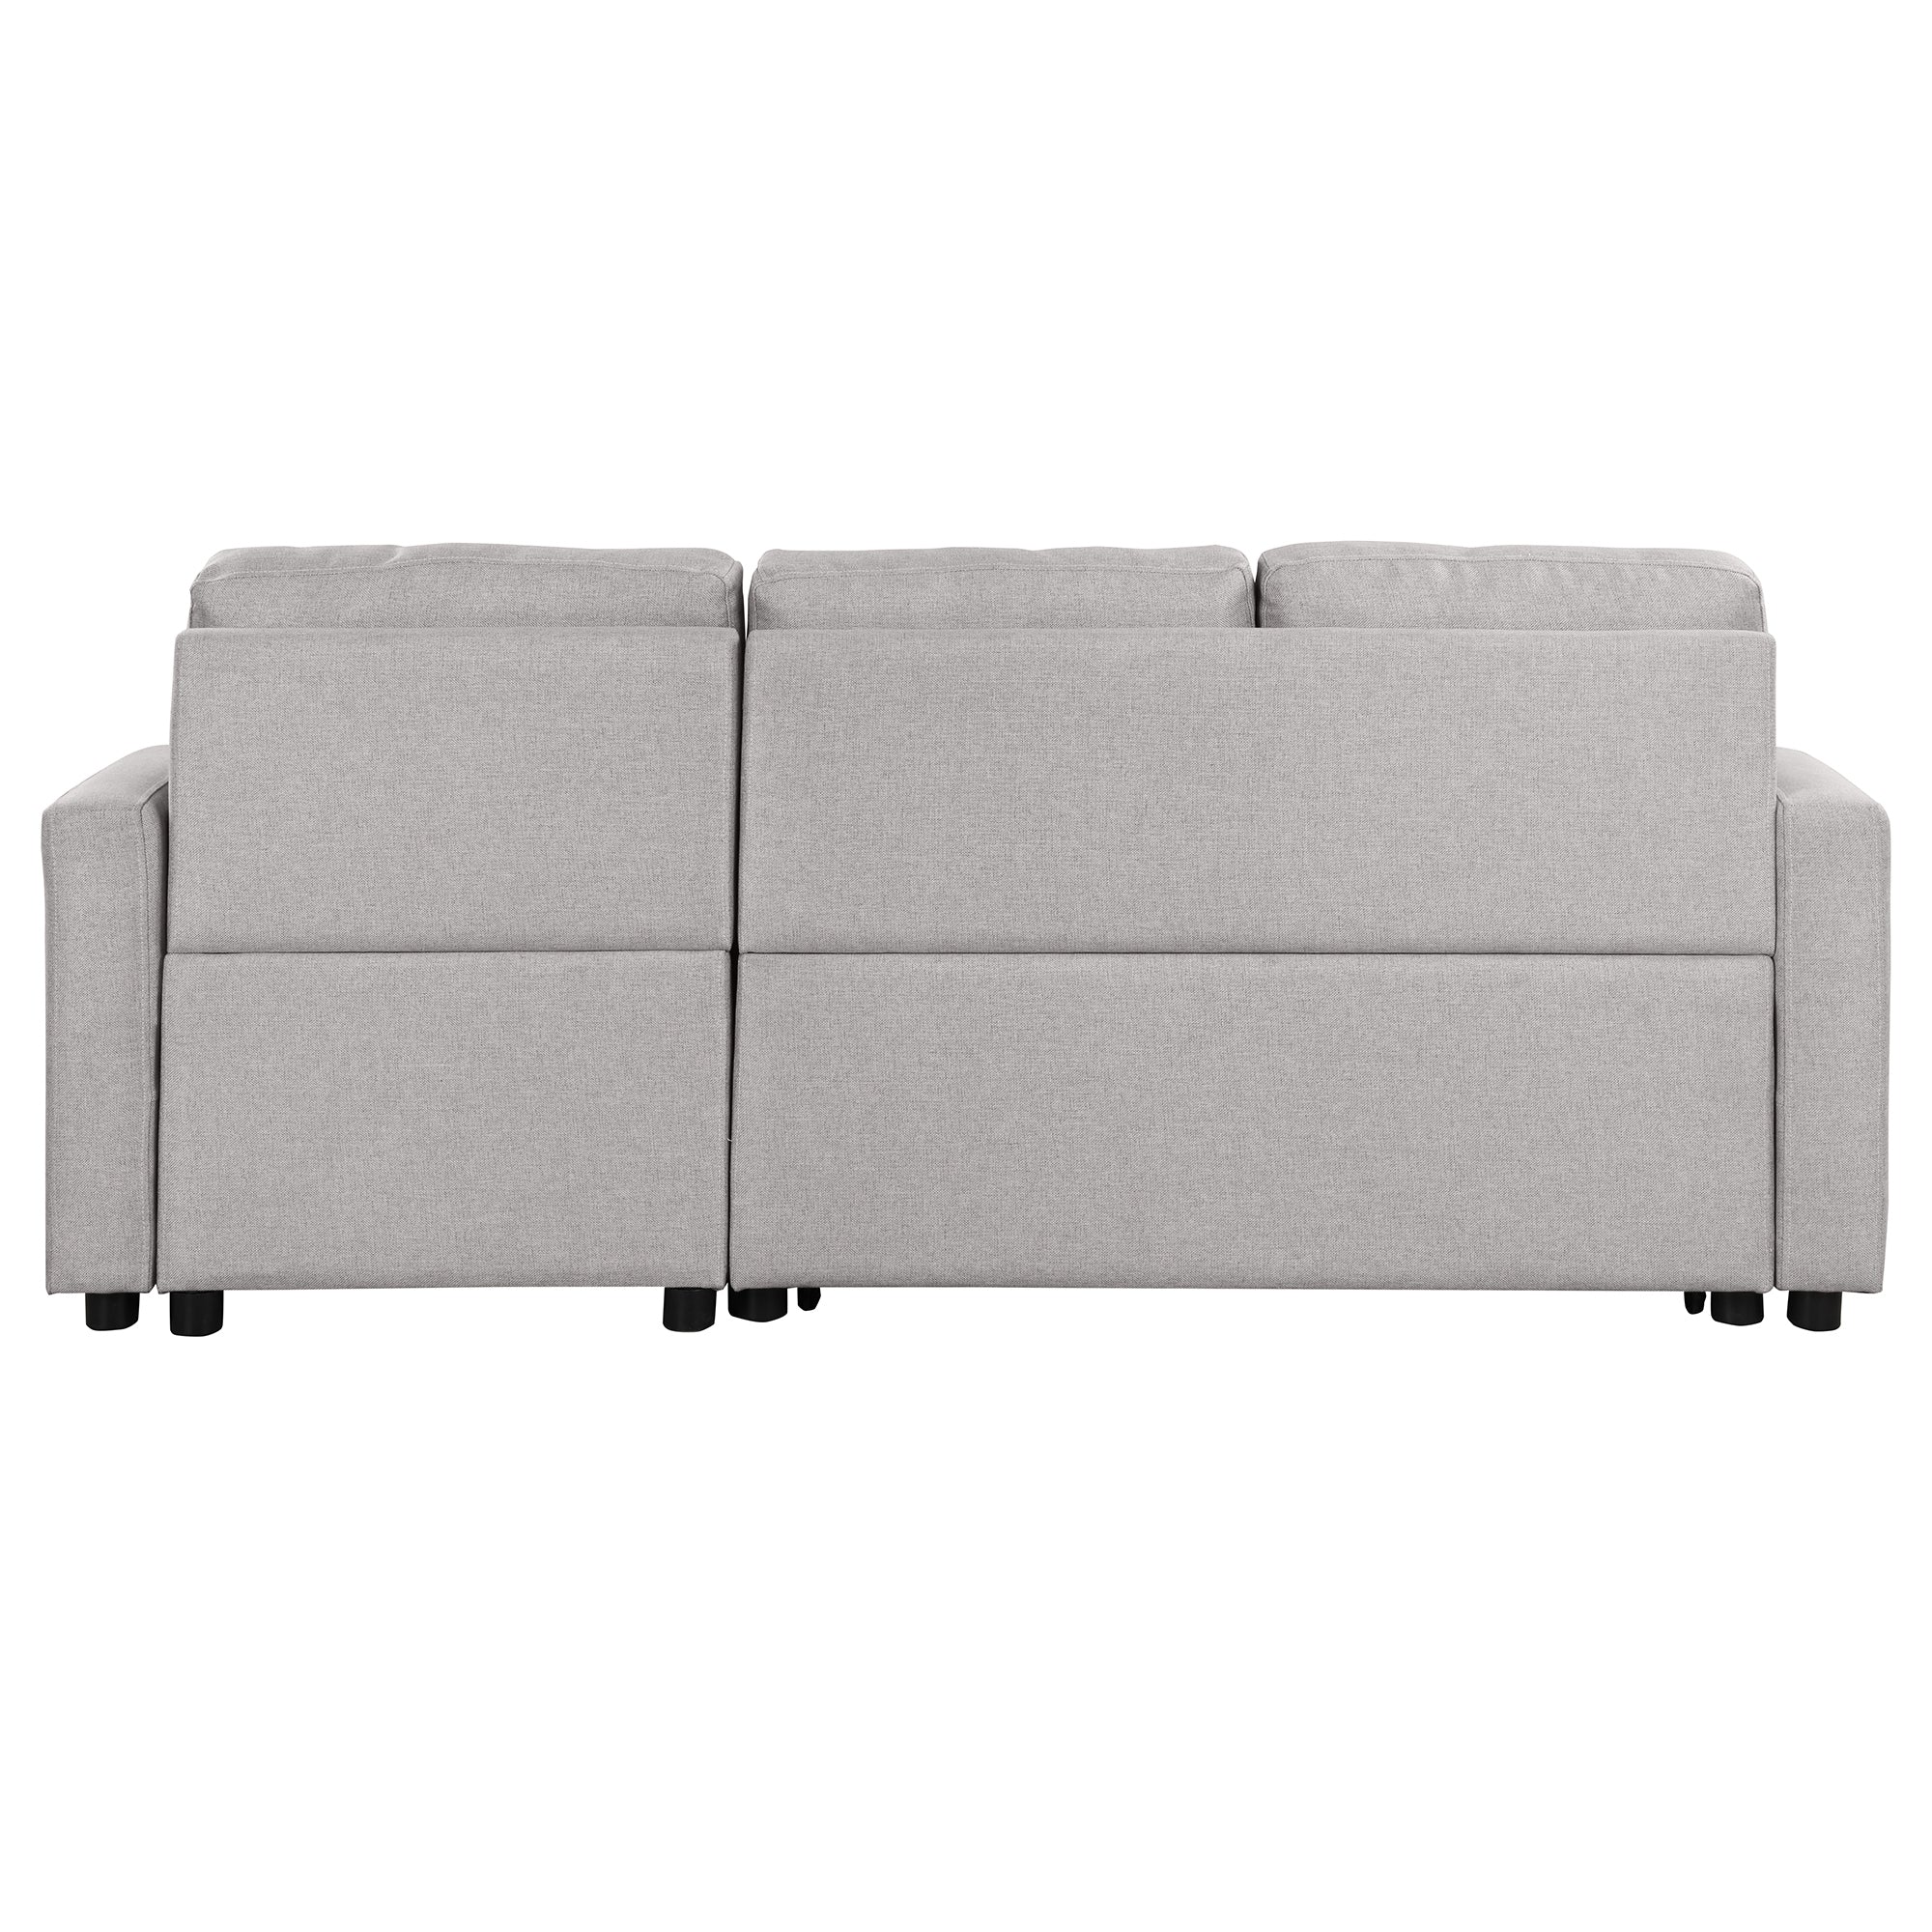 Orisfur Pull Out Sofa Bed Modern Padded Upholstered Sofa Bed | Linen Fabric 3 Seater Couch with Storage Chaise and Cup Holder | Ideal for Small Spaces-Sleeper Sofas-American Furniture Outlet